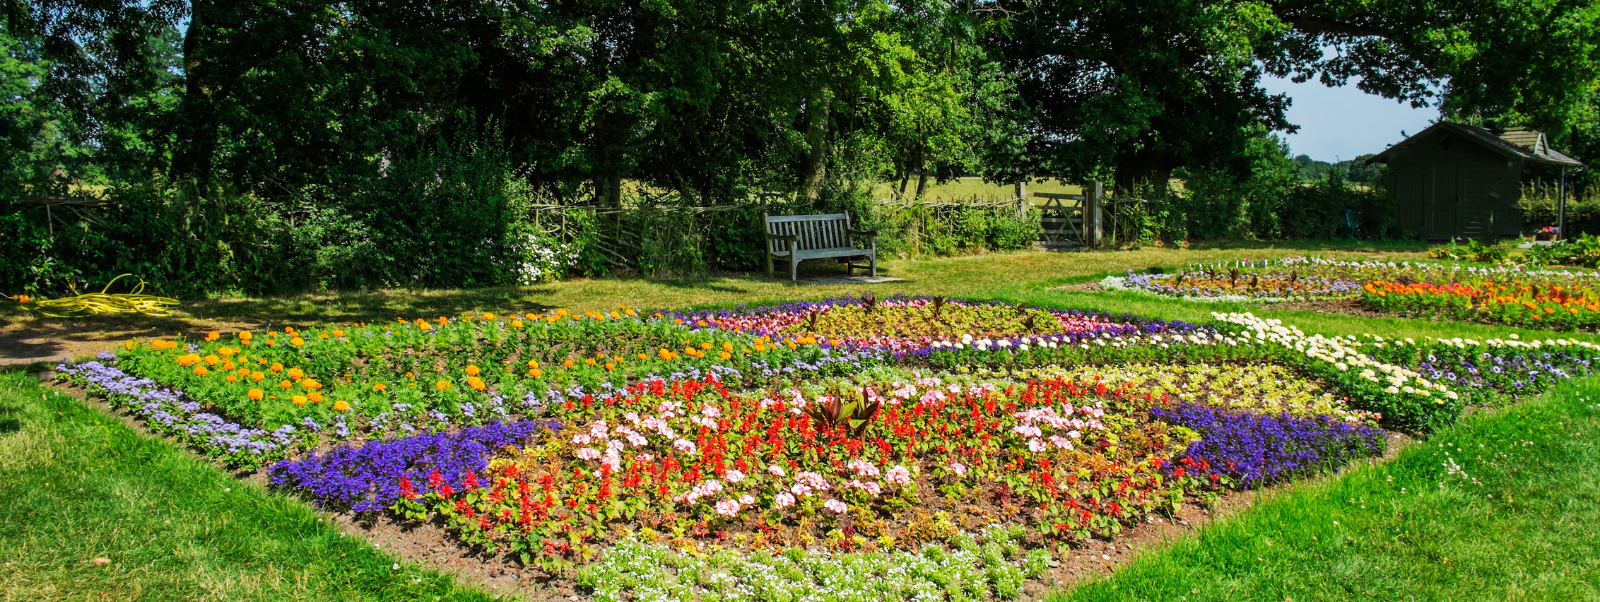 Image of garden plot with lots of colourful flowers